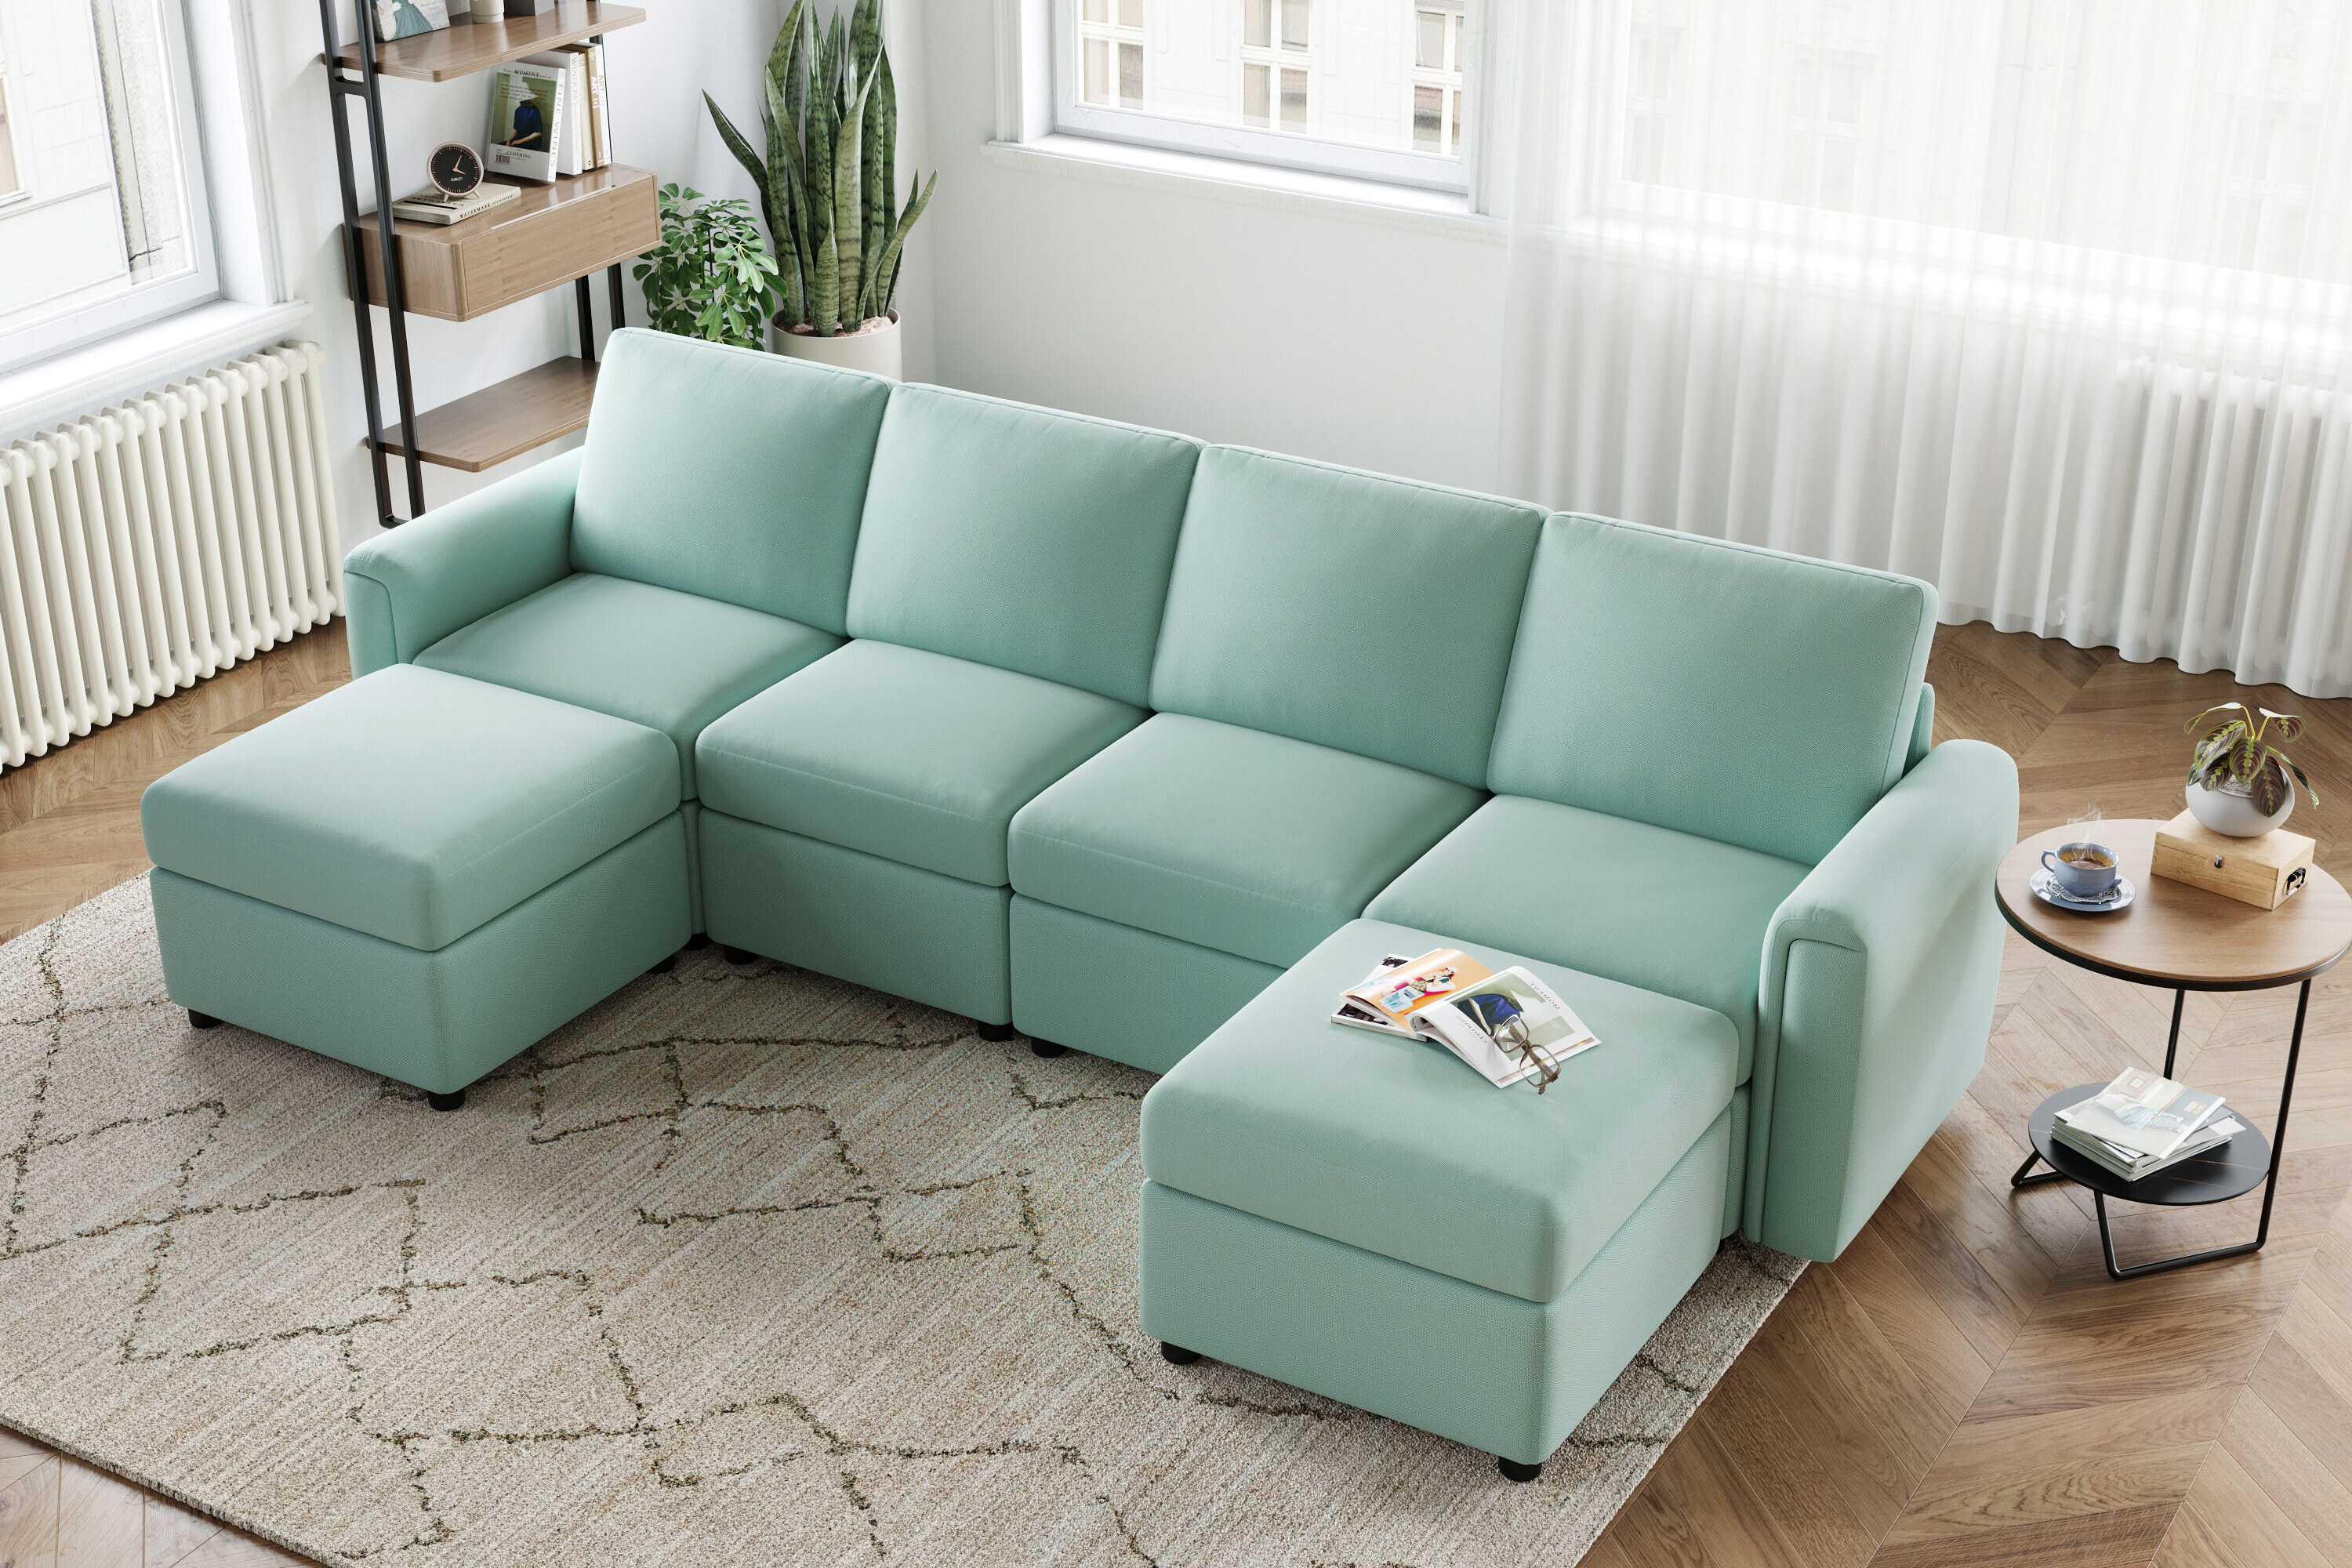 LINSY HOME Modular Couches and Sofas Sectional with Storage Sectional Sofa U Shaped Sectional Couch with Reversible Chaises, Teal - image 1 of 14